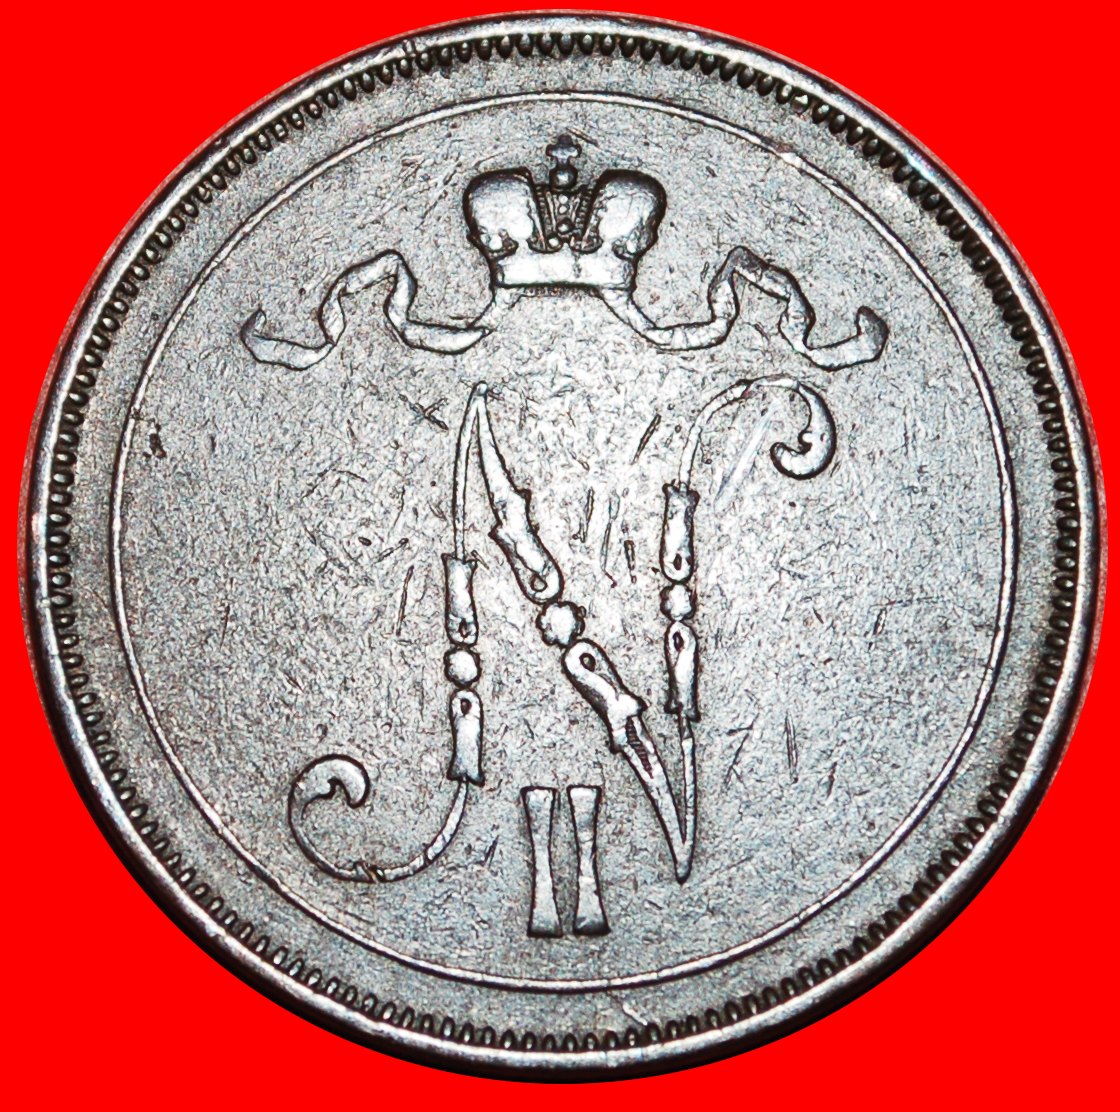  * MONOGRAMM (1895-1917): FINLAND (russia, the USSR in future) ★10 PENCE 1899★LOW START ★ NO RESERVE!   